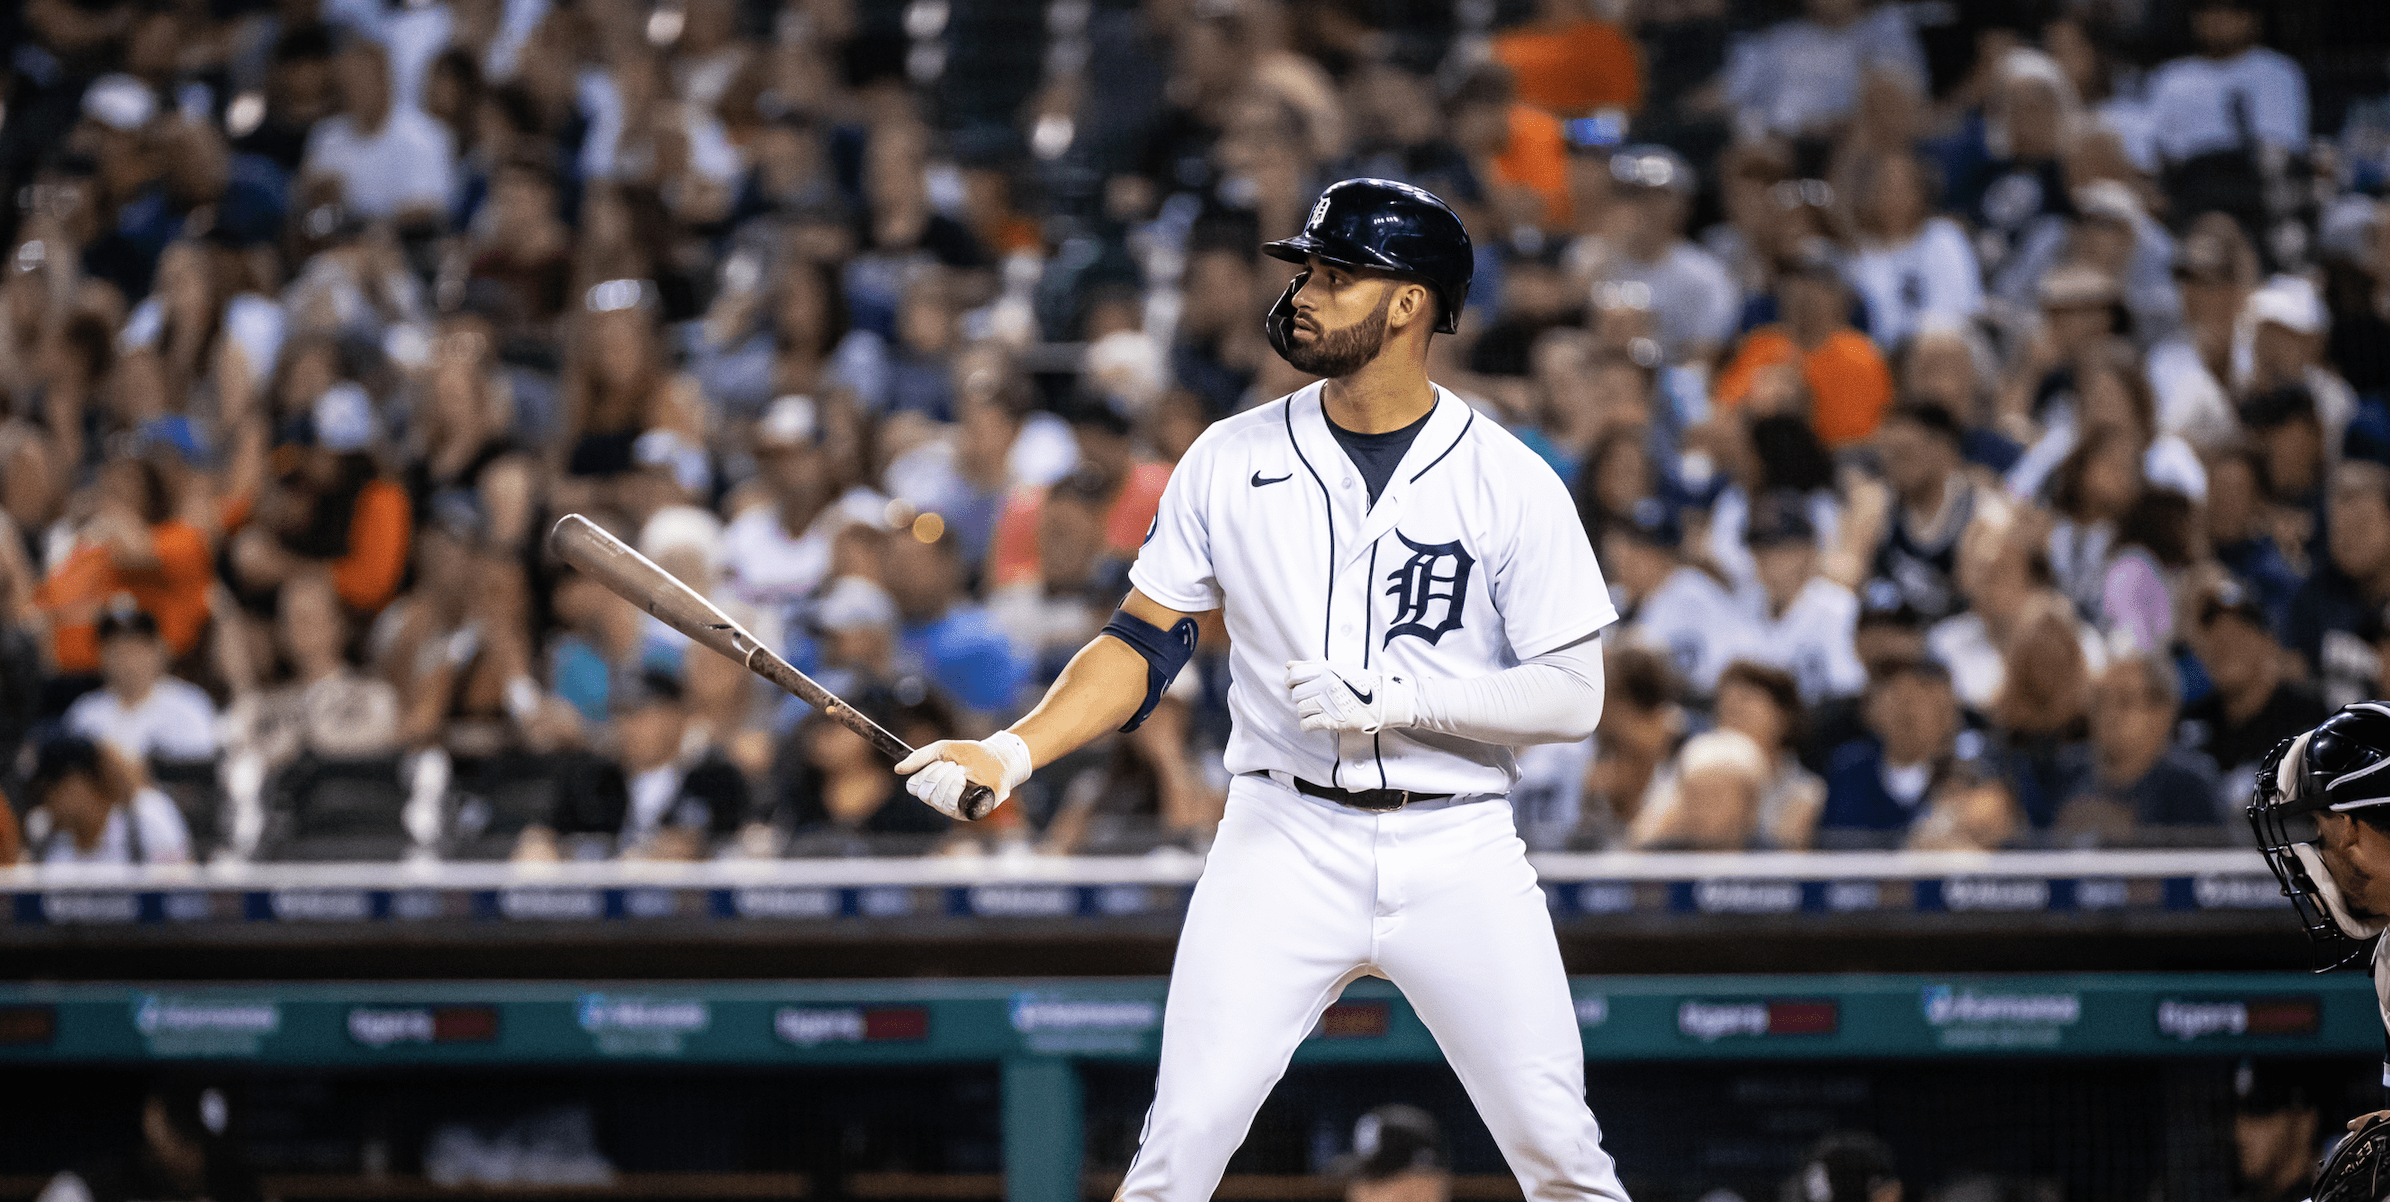 Tigers OF Riley Greene will undergo season ending elbow surgery tomorrow  after being on the IL since September 2nd with an initial…